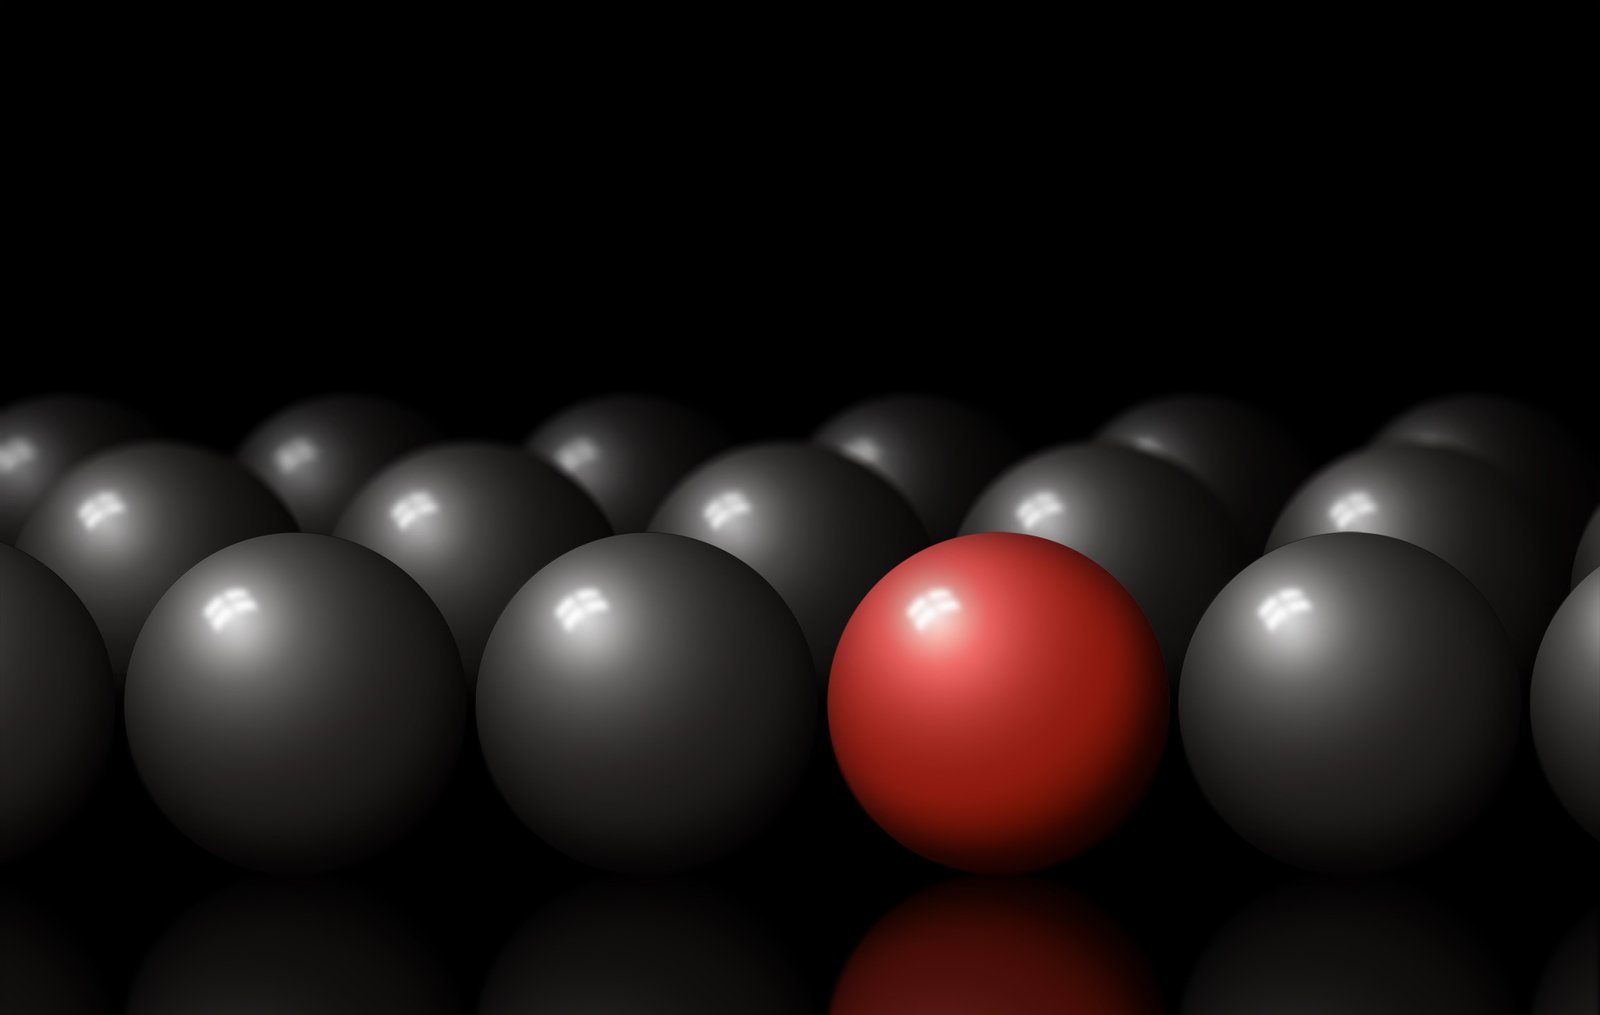 a red sphere in front of several dark gray balls